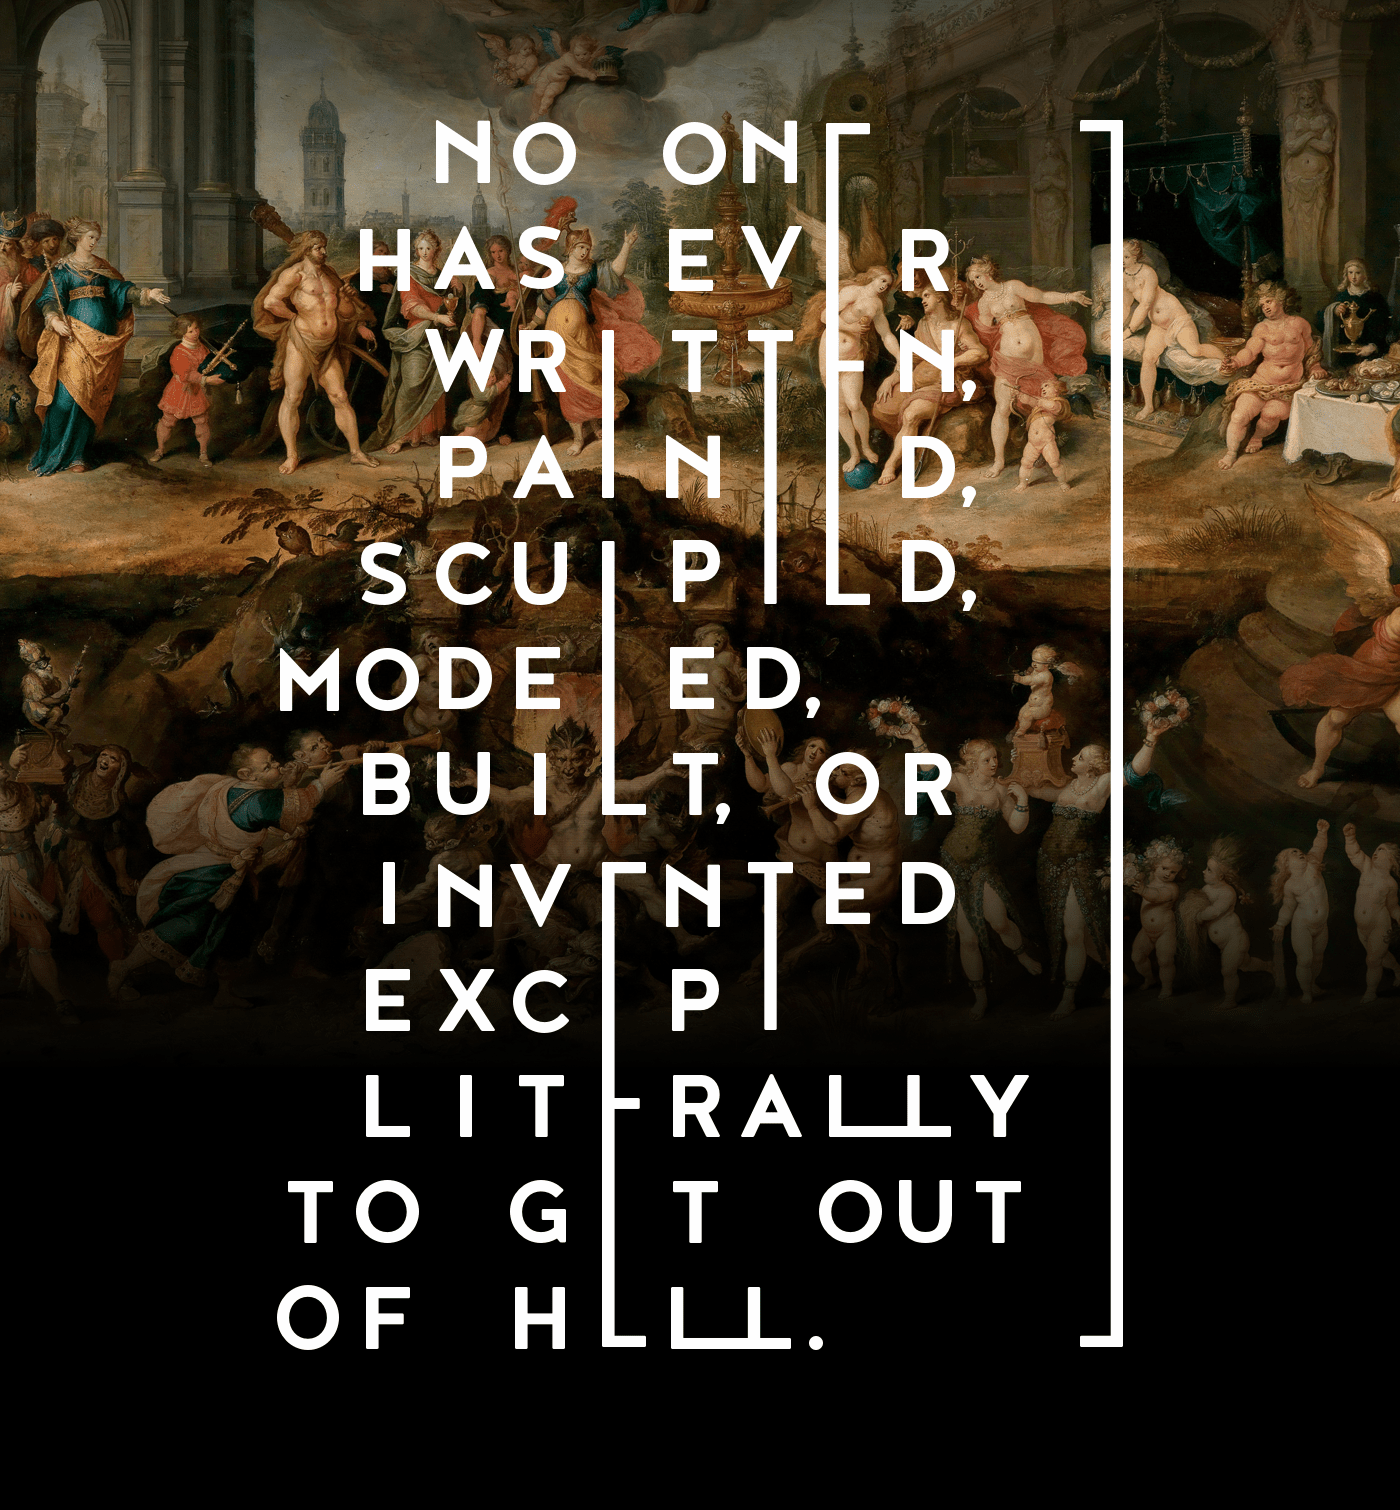 No one has ever written, painted, sculpted, modeled, built, or invented except literally to get out 